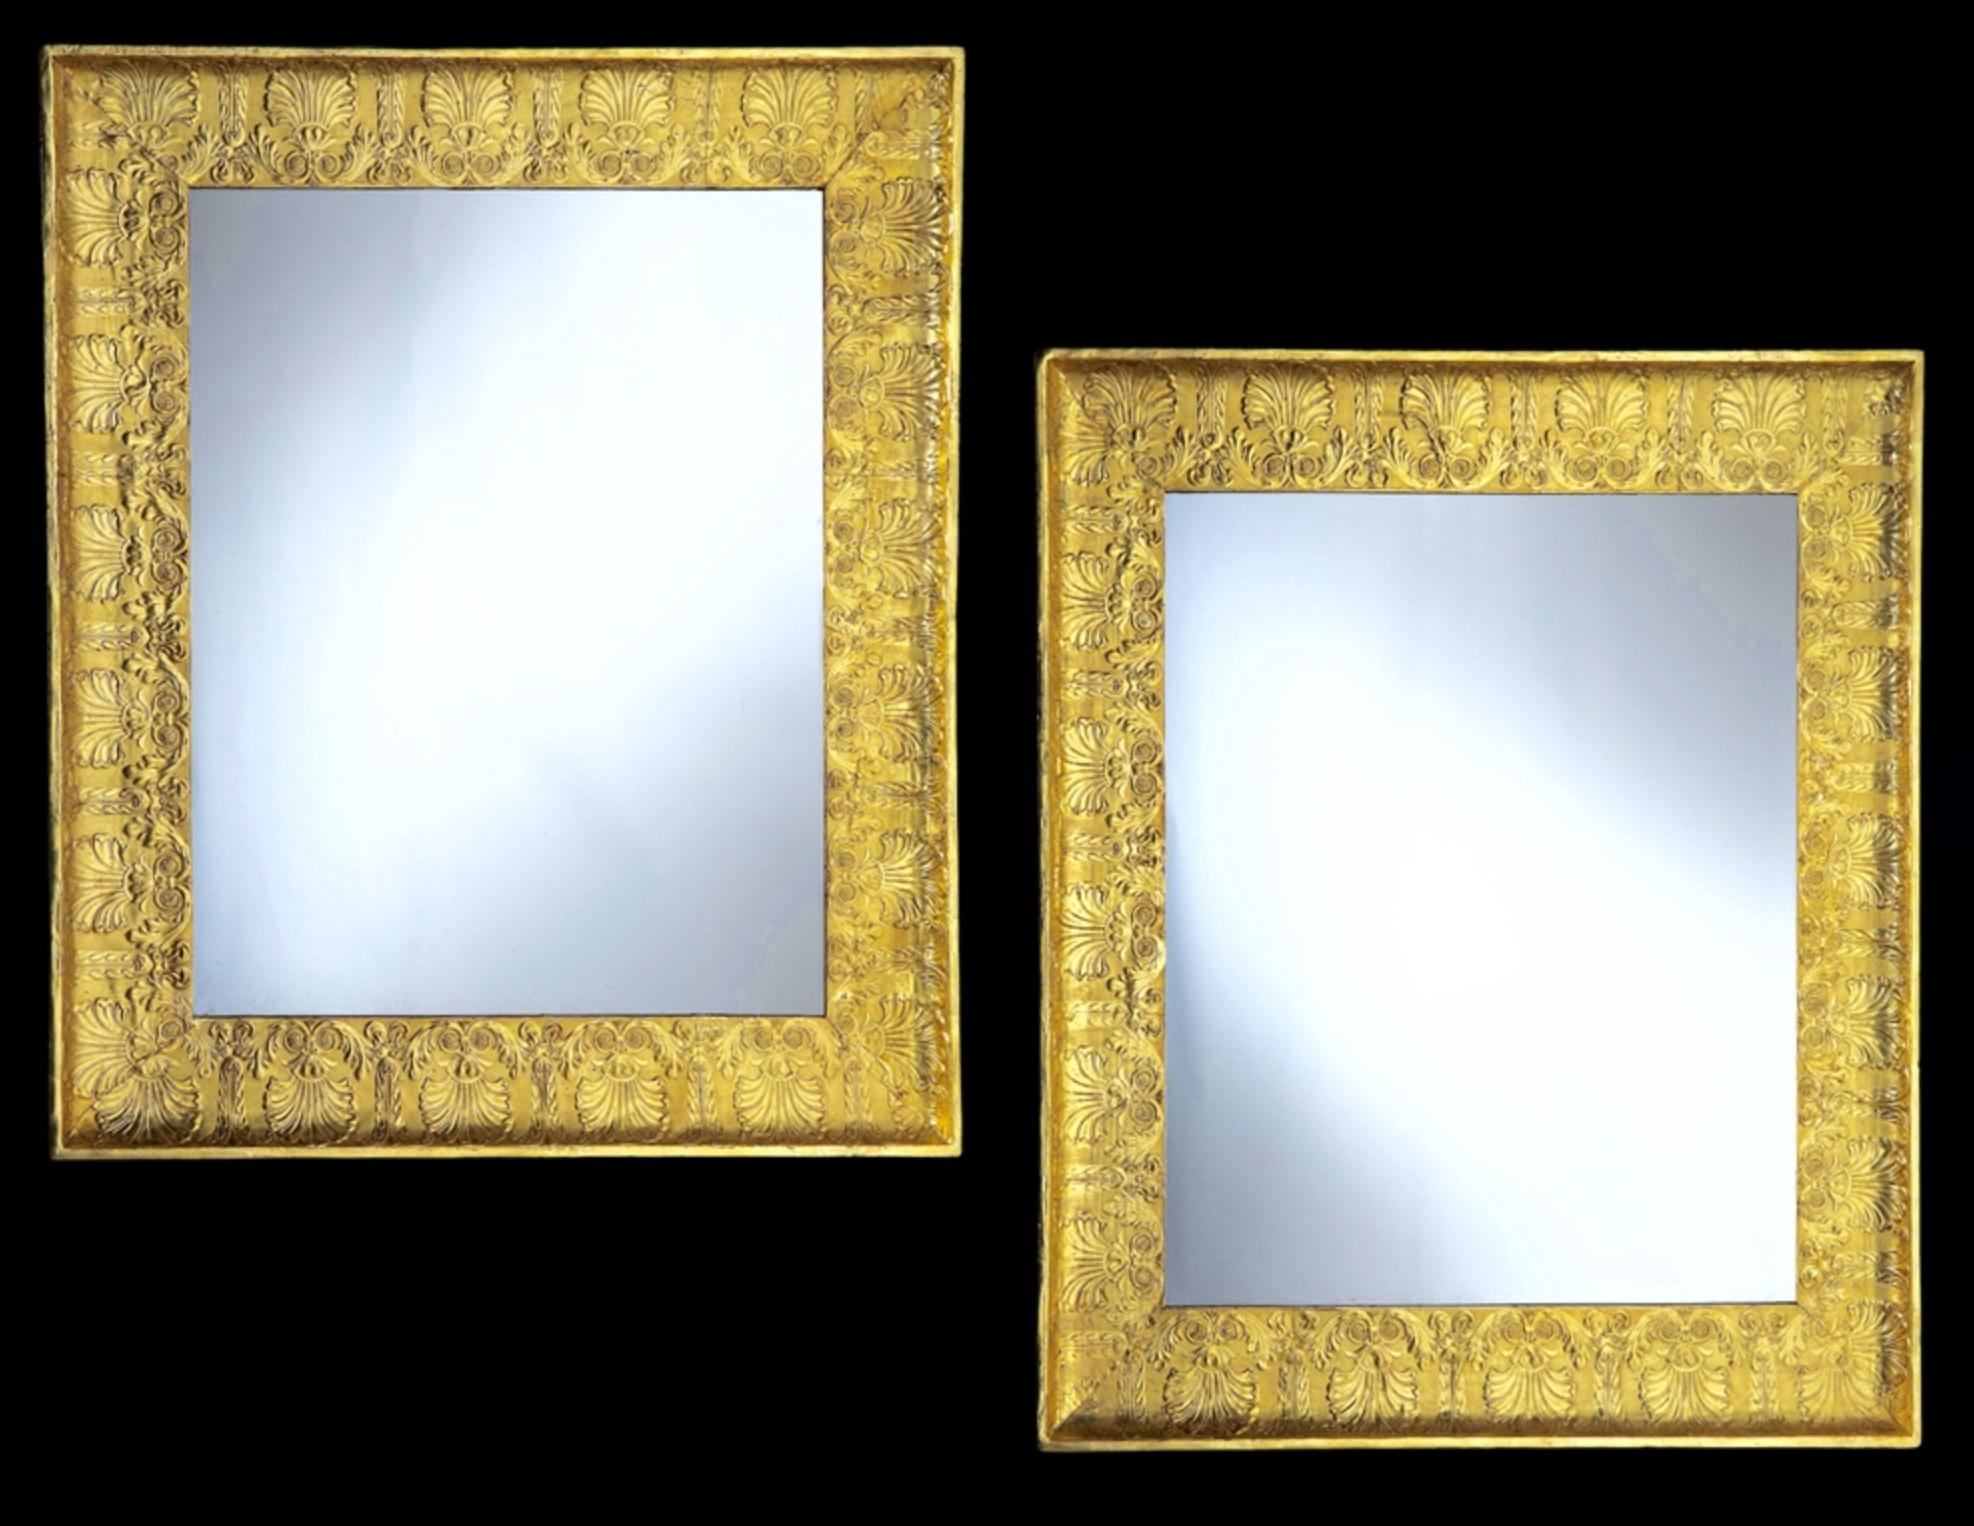 A superb pair of mid 19th century Italian mirrrors, the square concave frames decorated with gilded pressed card with stylised foliate and acanthus decoration, with fine antique mirror plates with a wonderful sparkle to the glass.